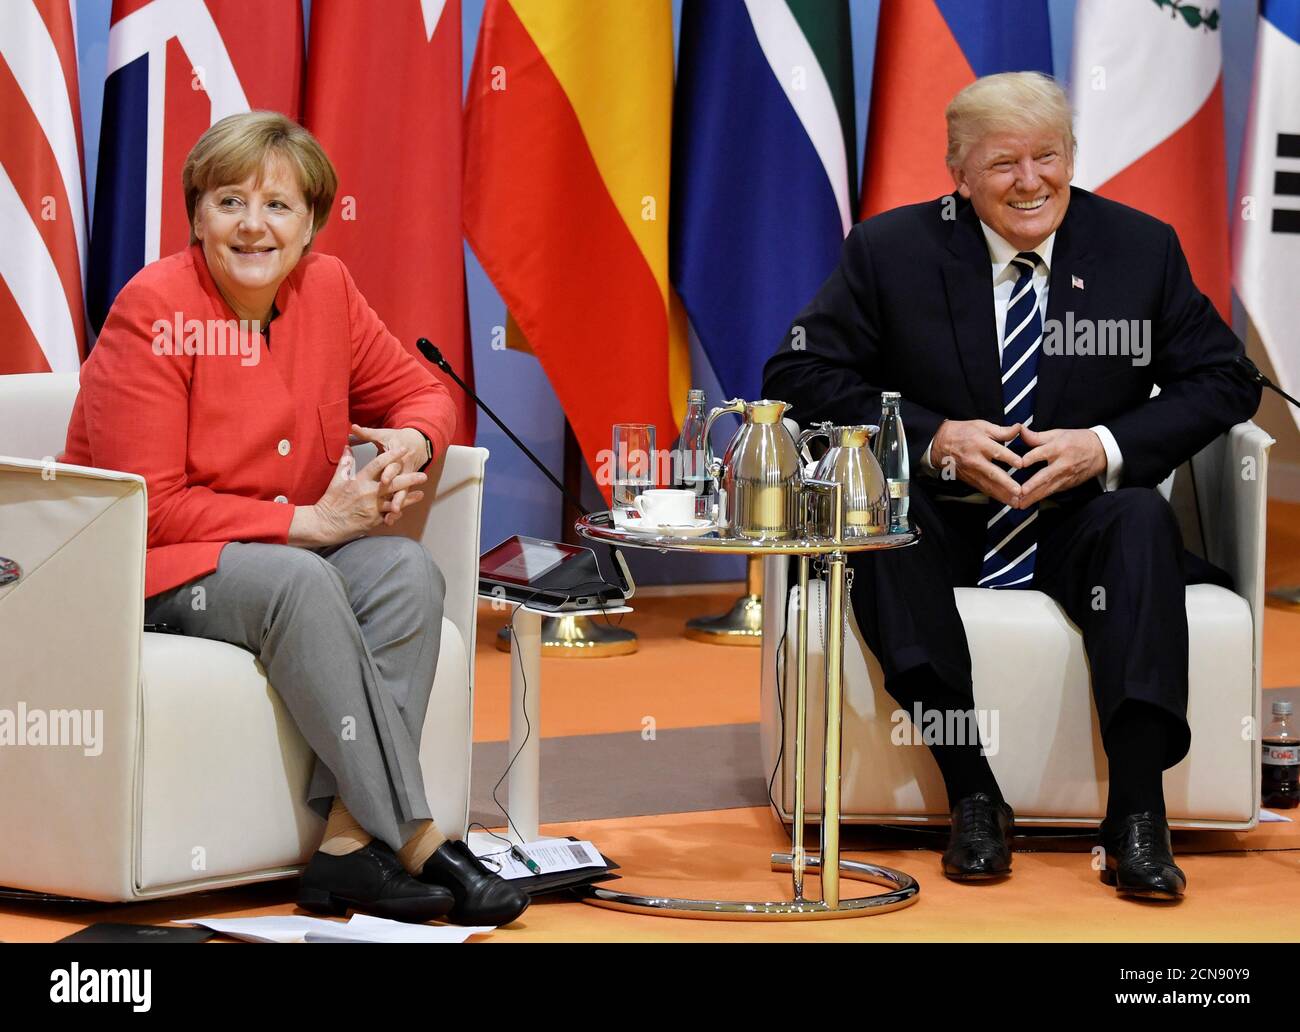 German Chancellor Angela Merkel and US President Donald Trump meet at the start of the 'retreat meeting' on the first day of the G20 summit in Hamburg, Germany, July 7, 2017. REUTERS/John MACDOUGALL,POOL Stock Photo